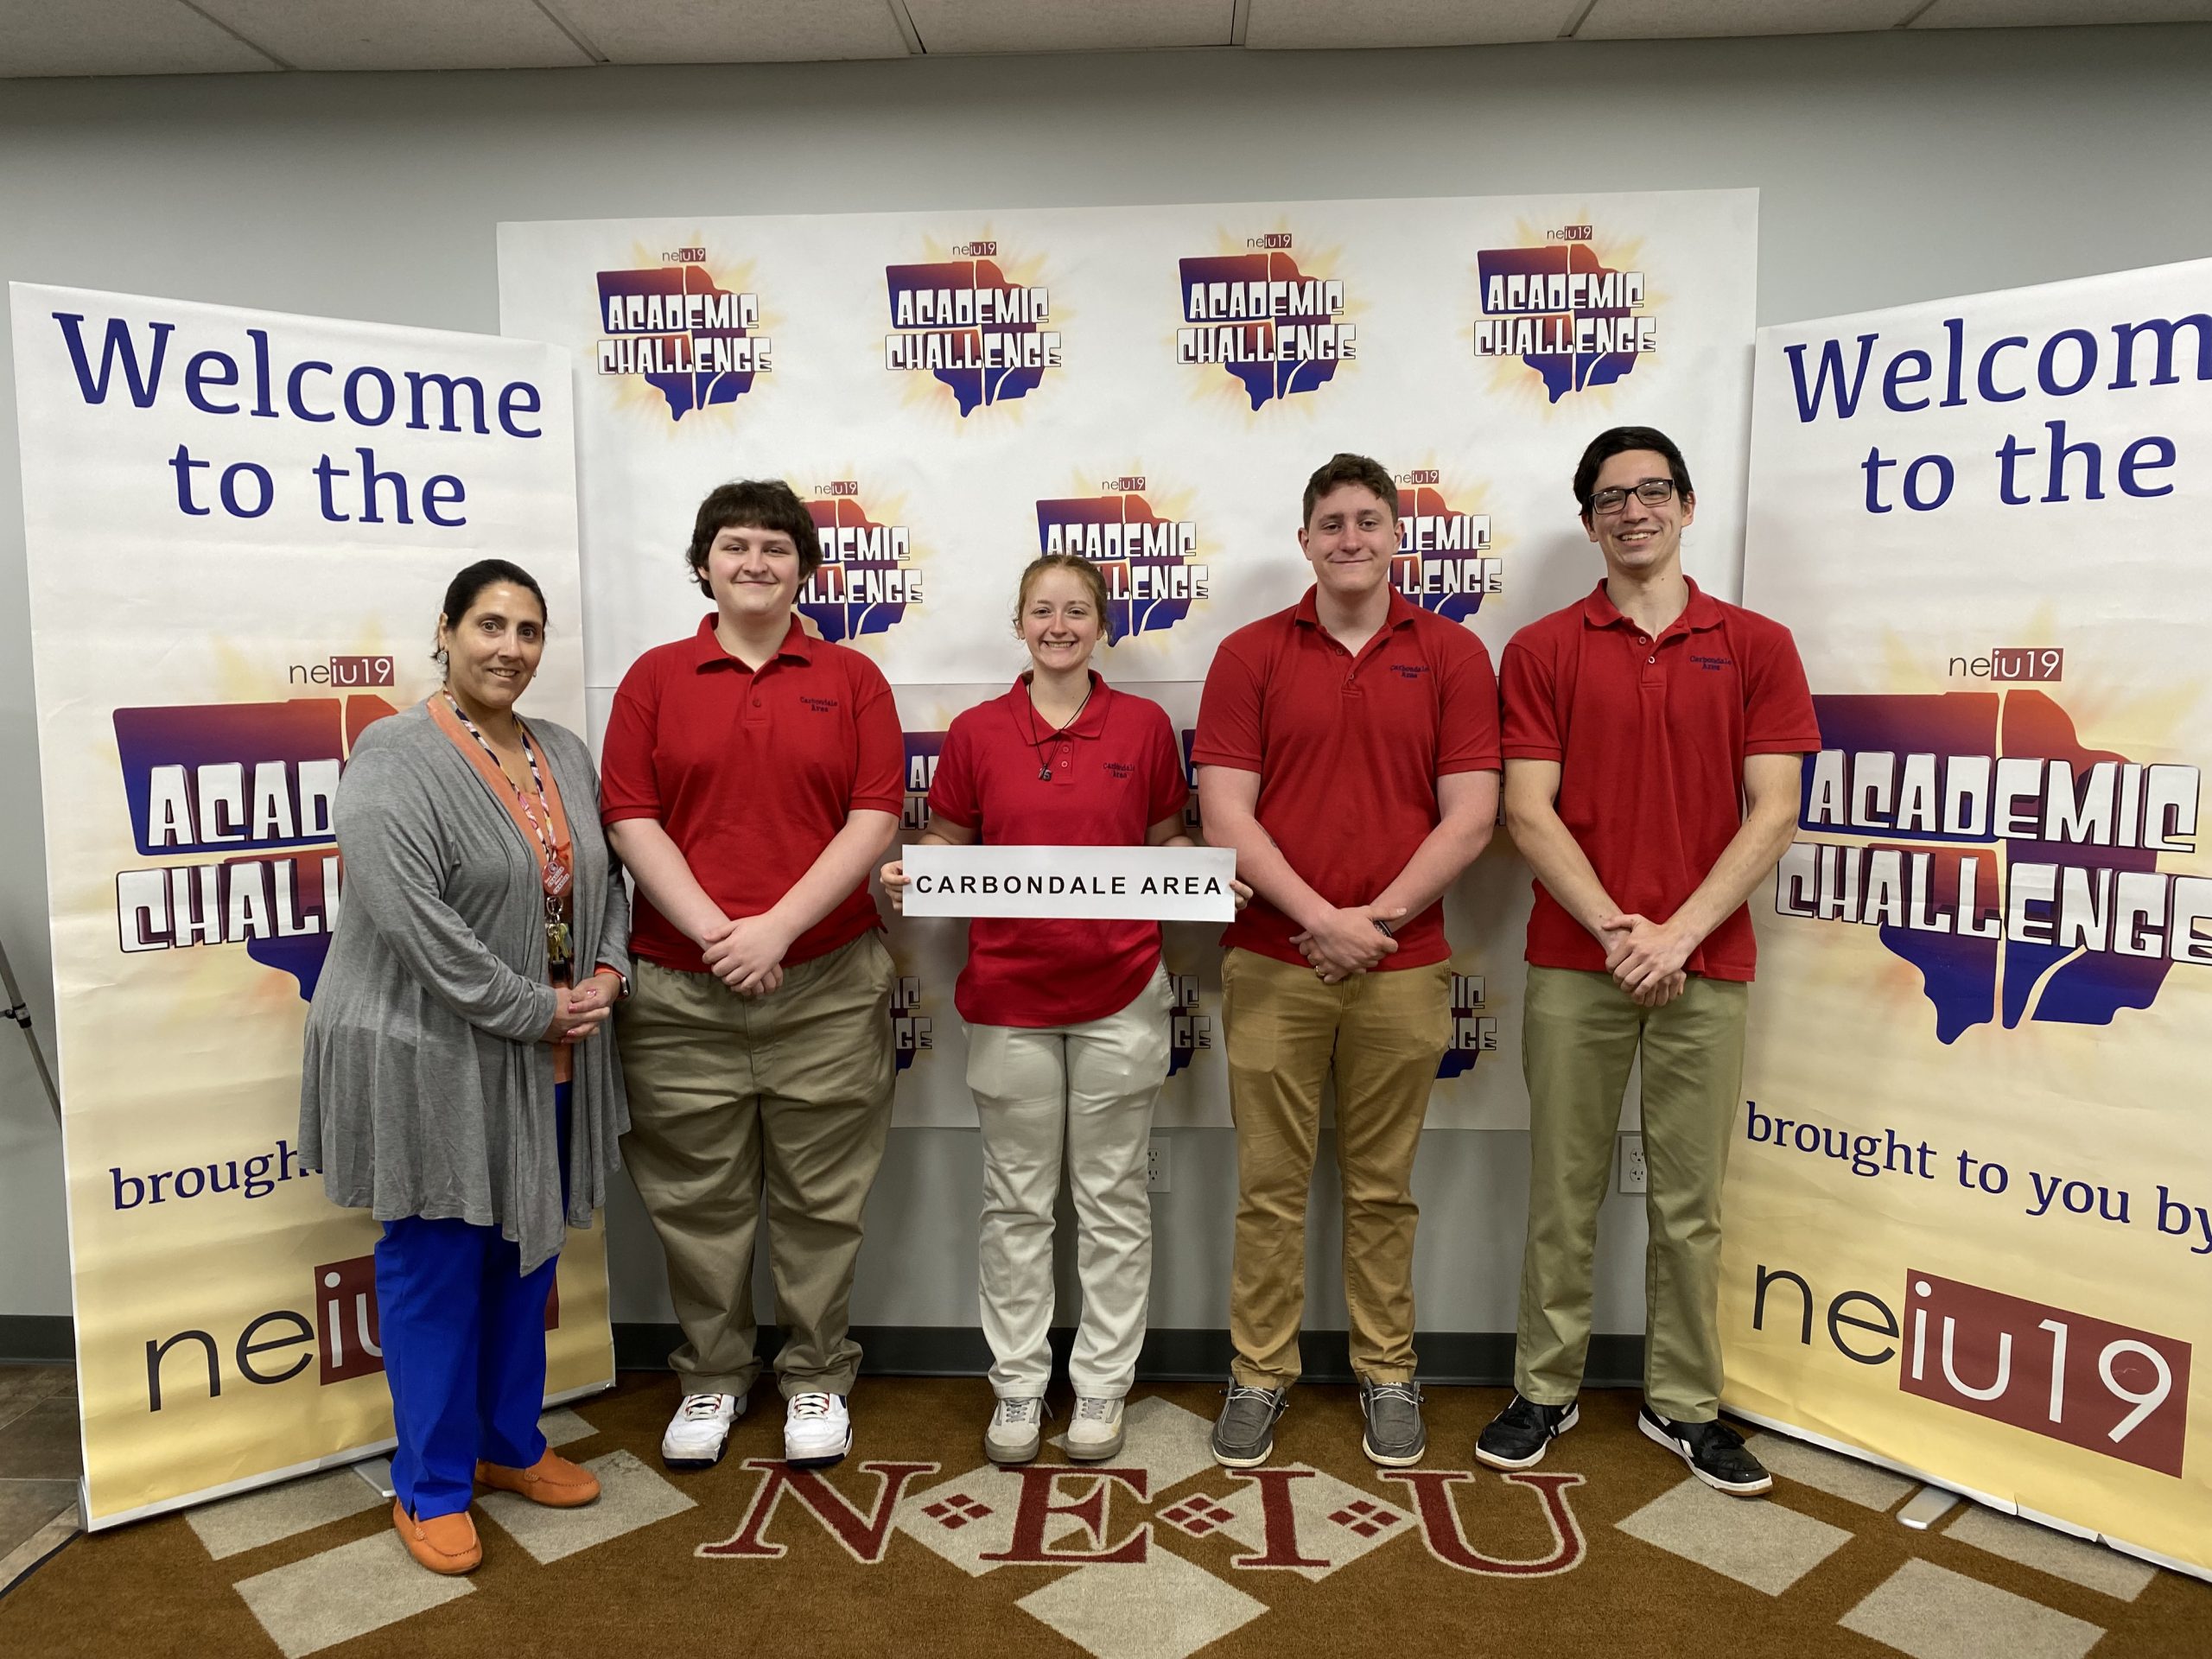 Charger Scholastic Bowl Team Competes in NEIU Academic Challenge